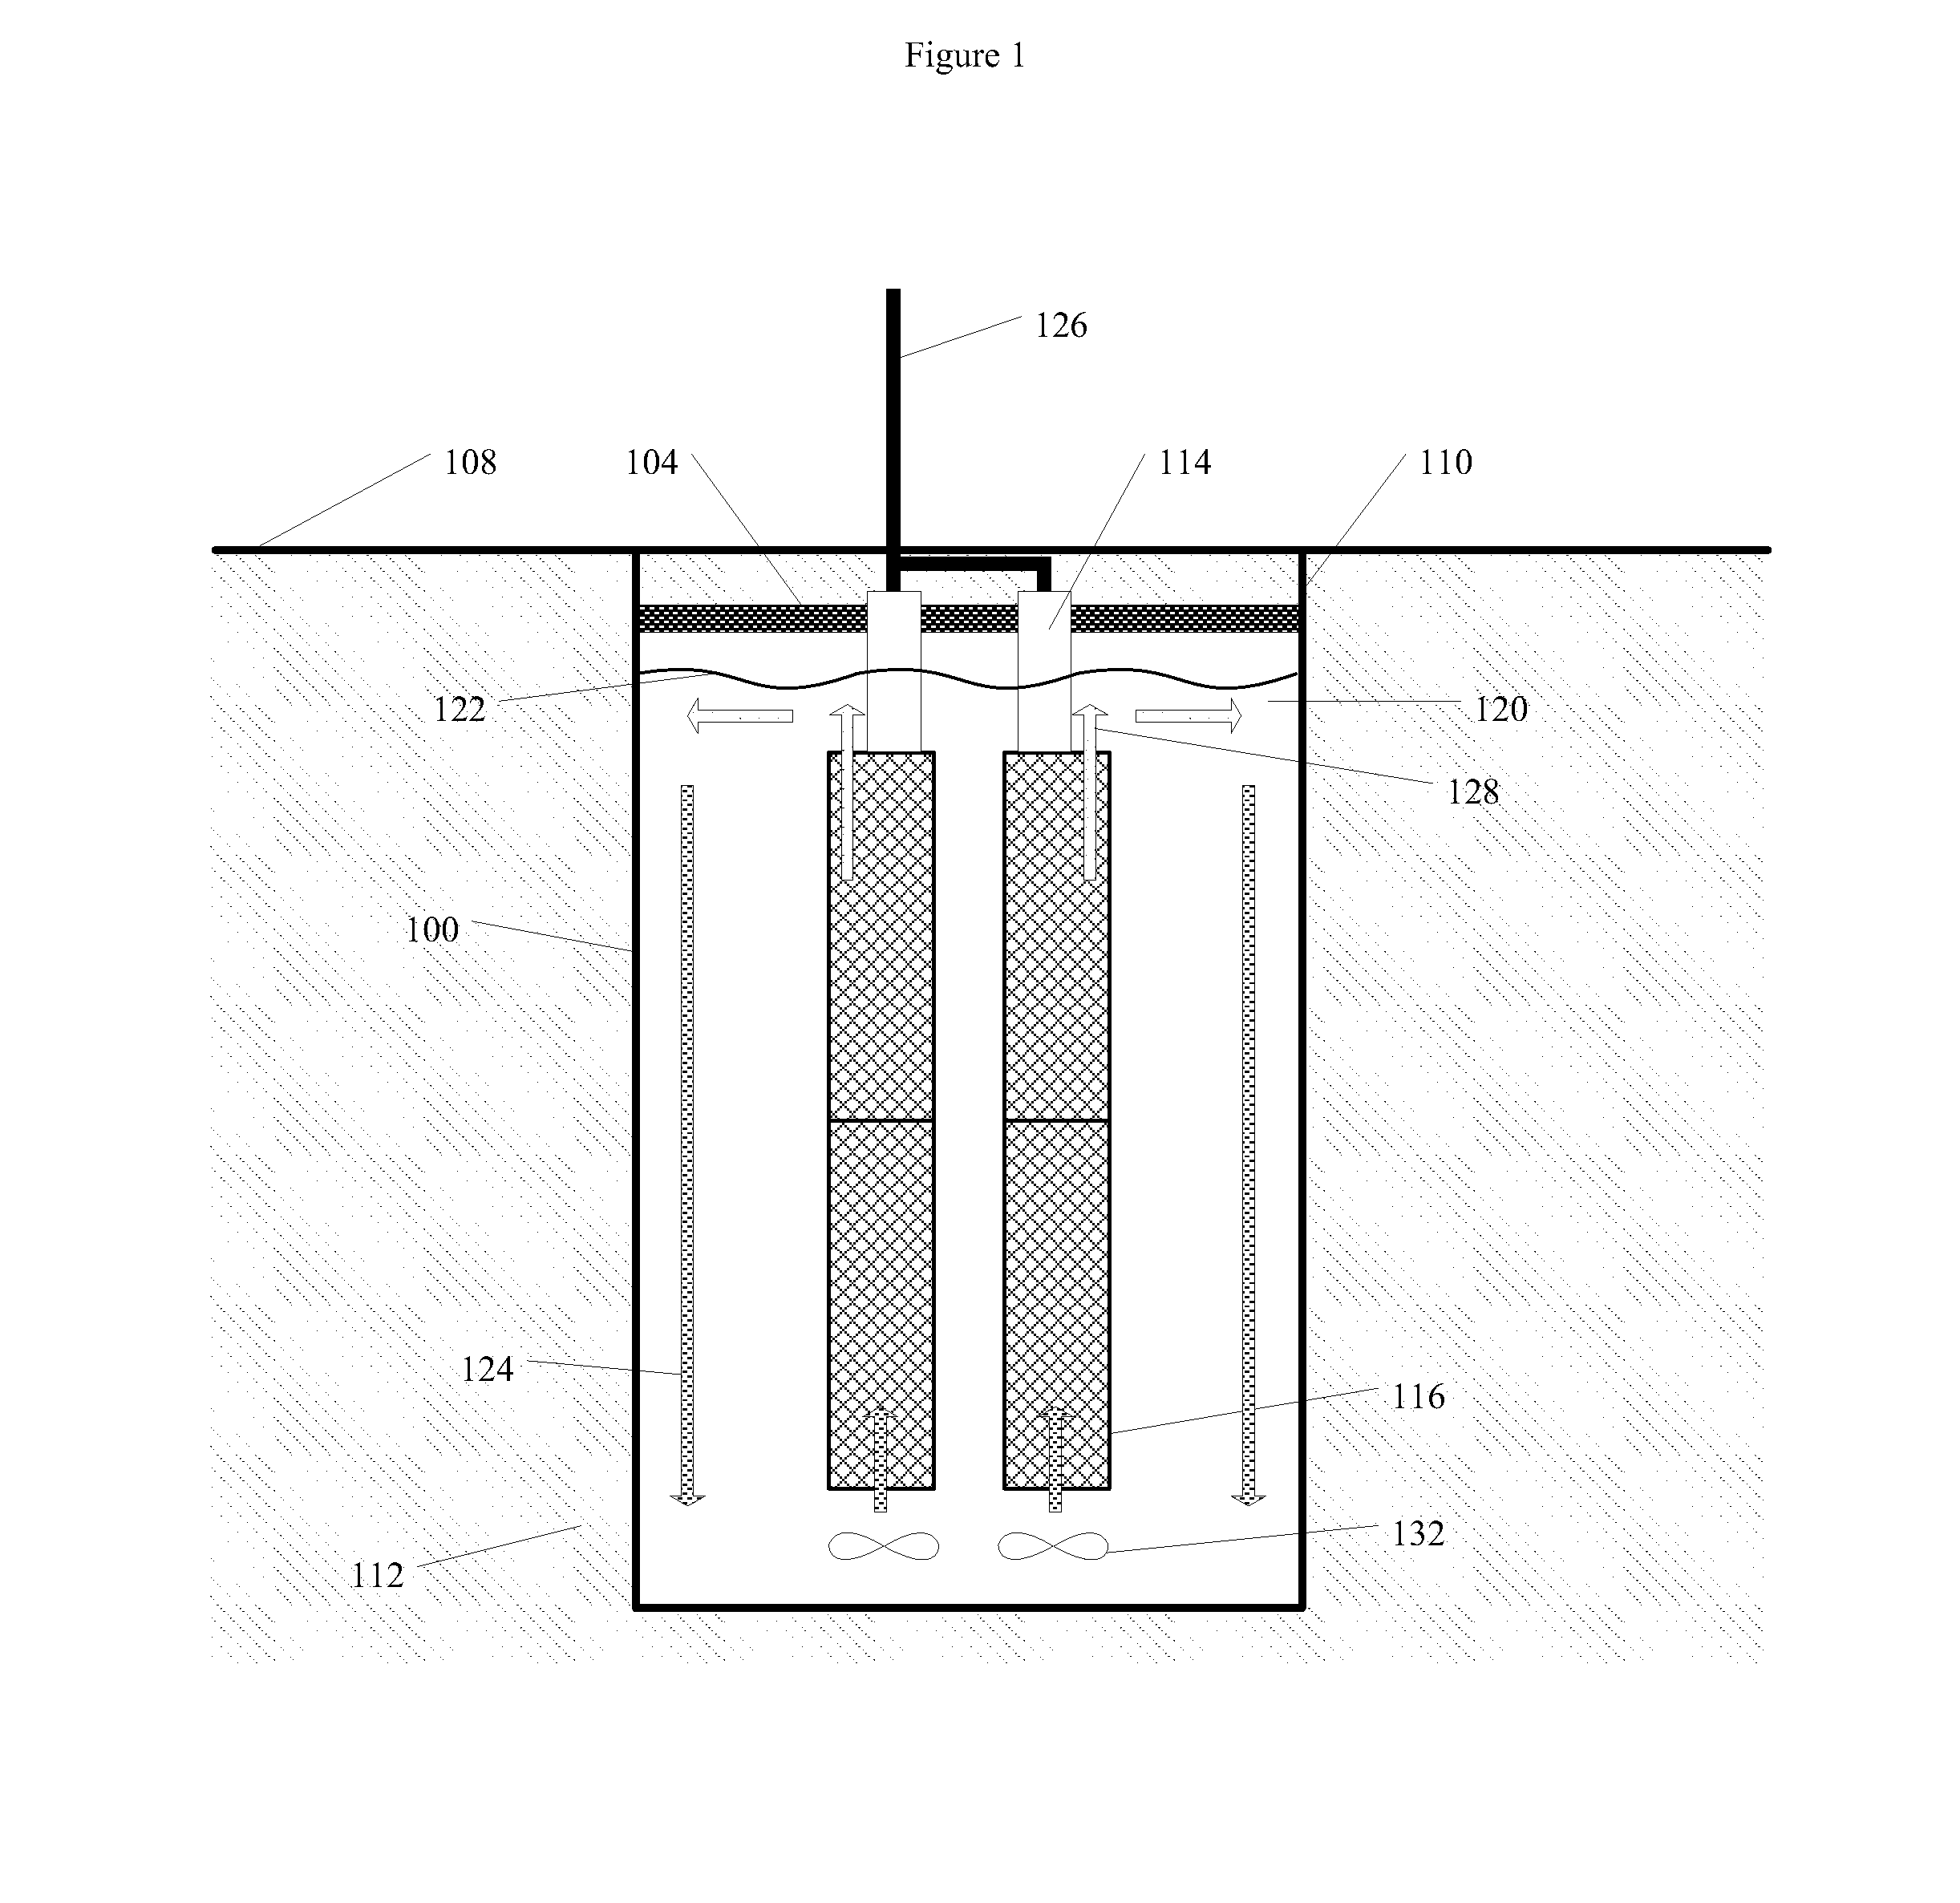 Apparatus and method for geothermally cooling electronic devices installed in a subsurface environment